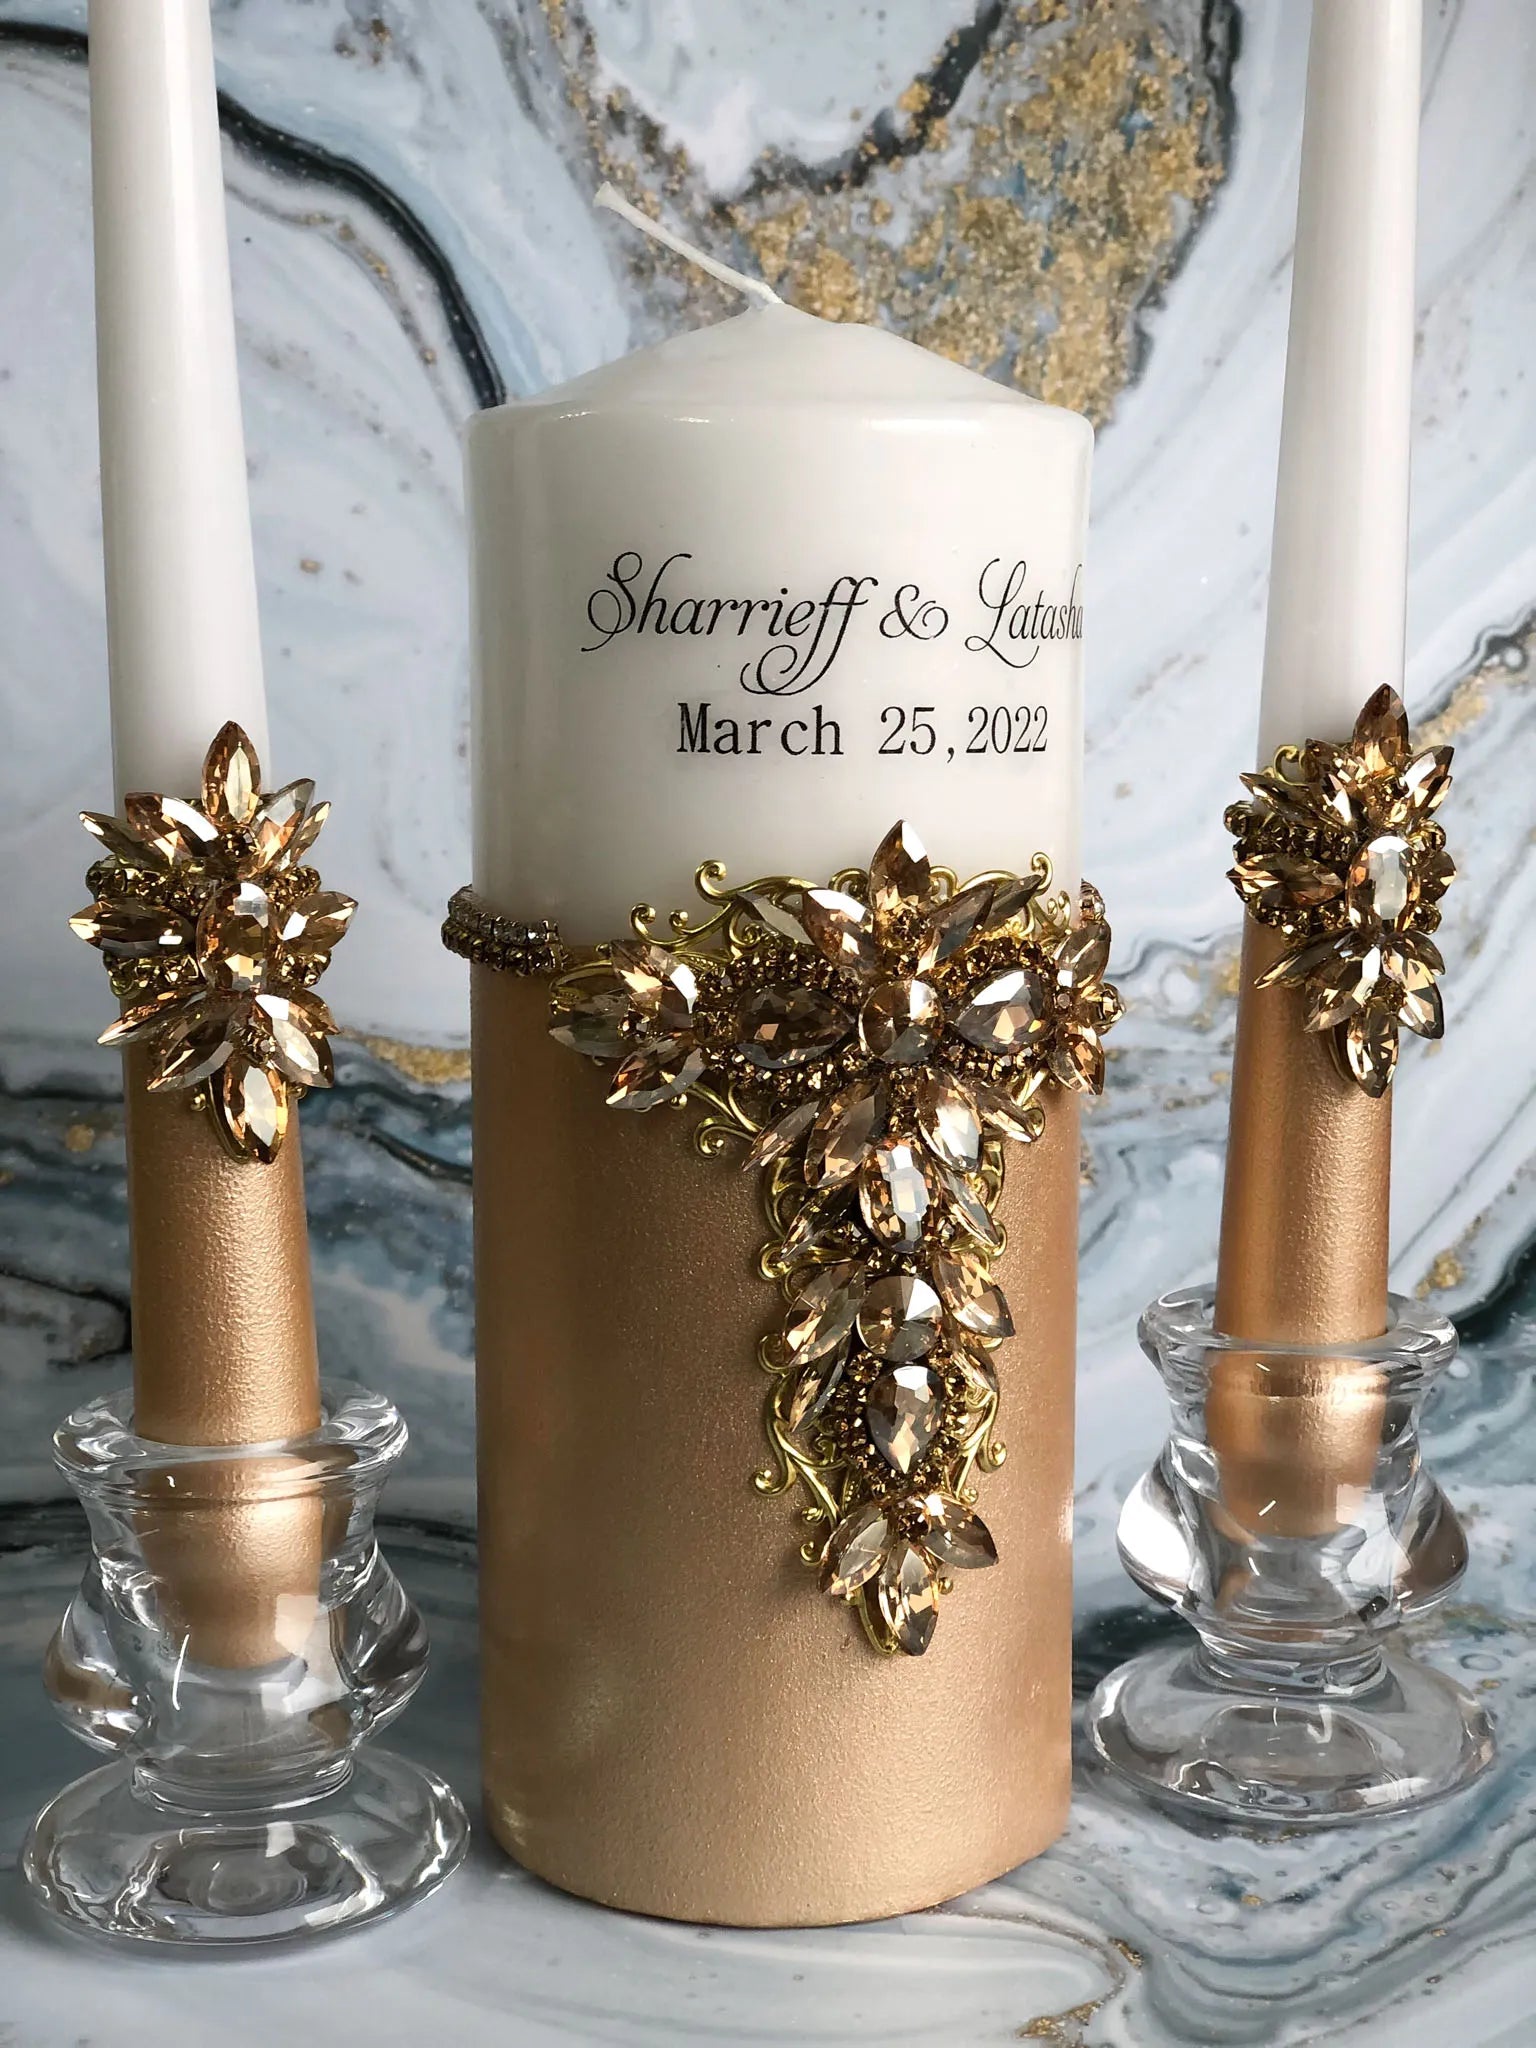 Personalized wedding candles with metallic accents